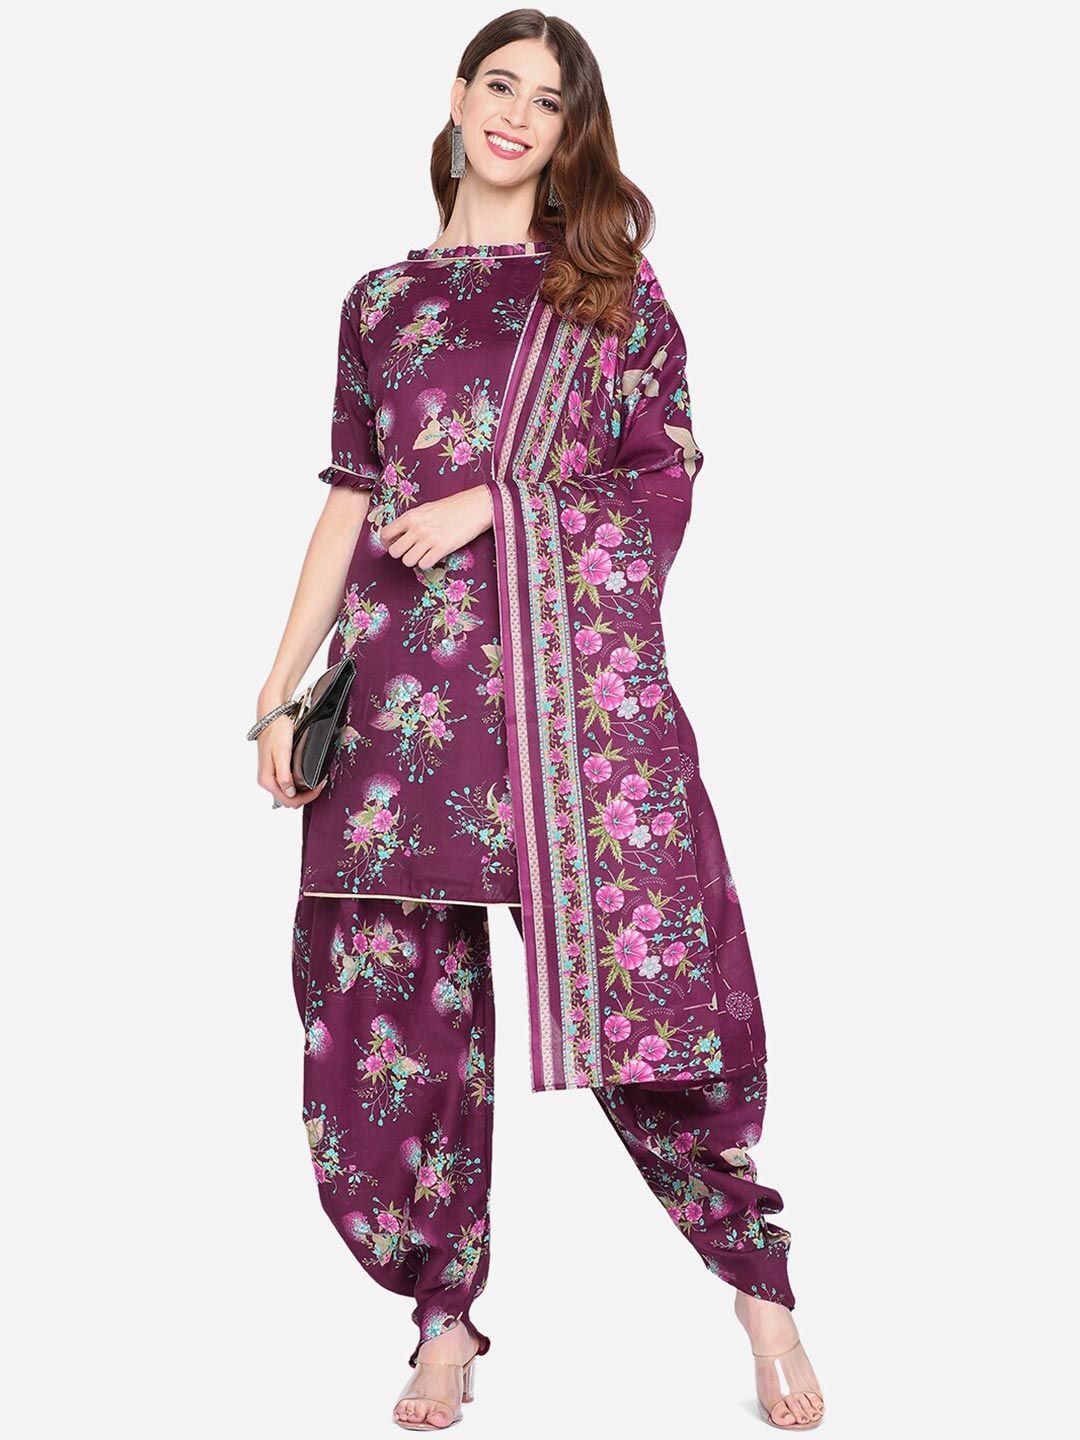 SHAVYA Violet & Pink Printed Unstitched Dress Material Price in India